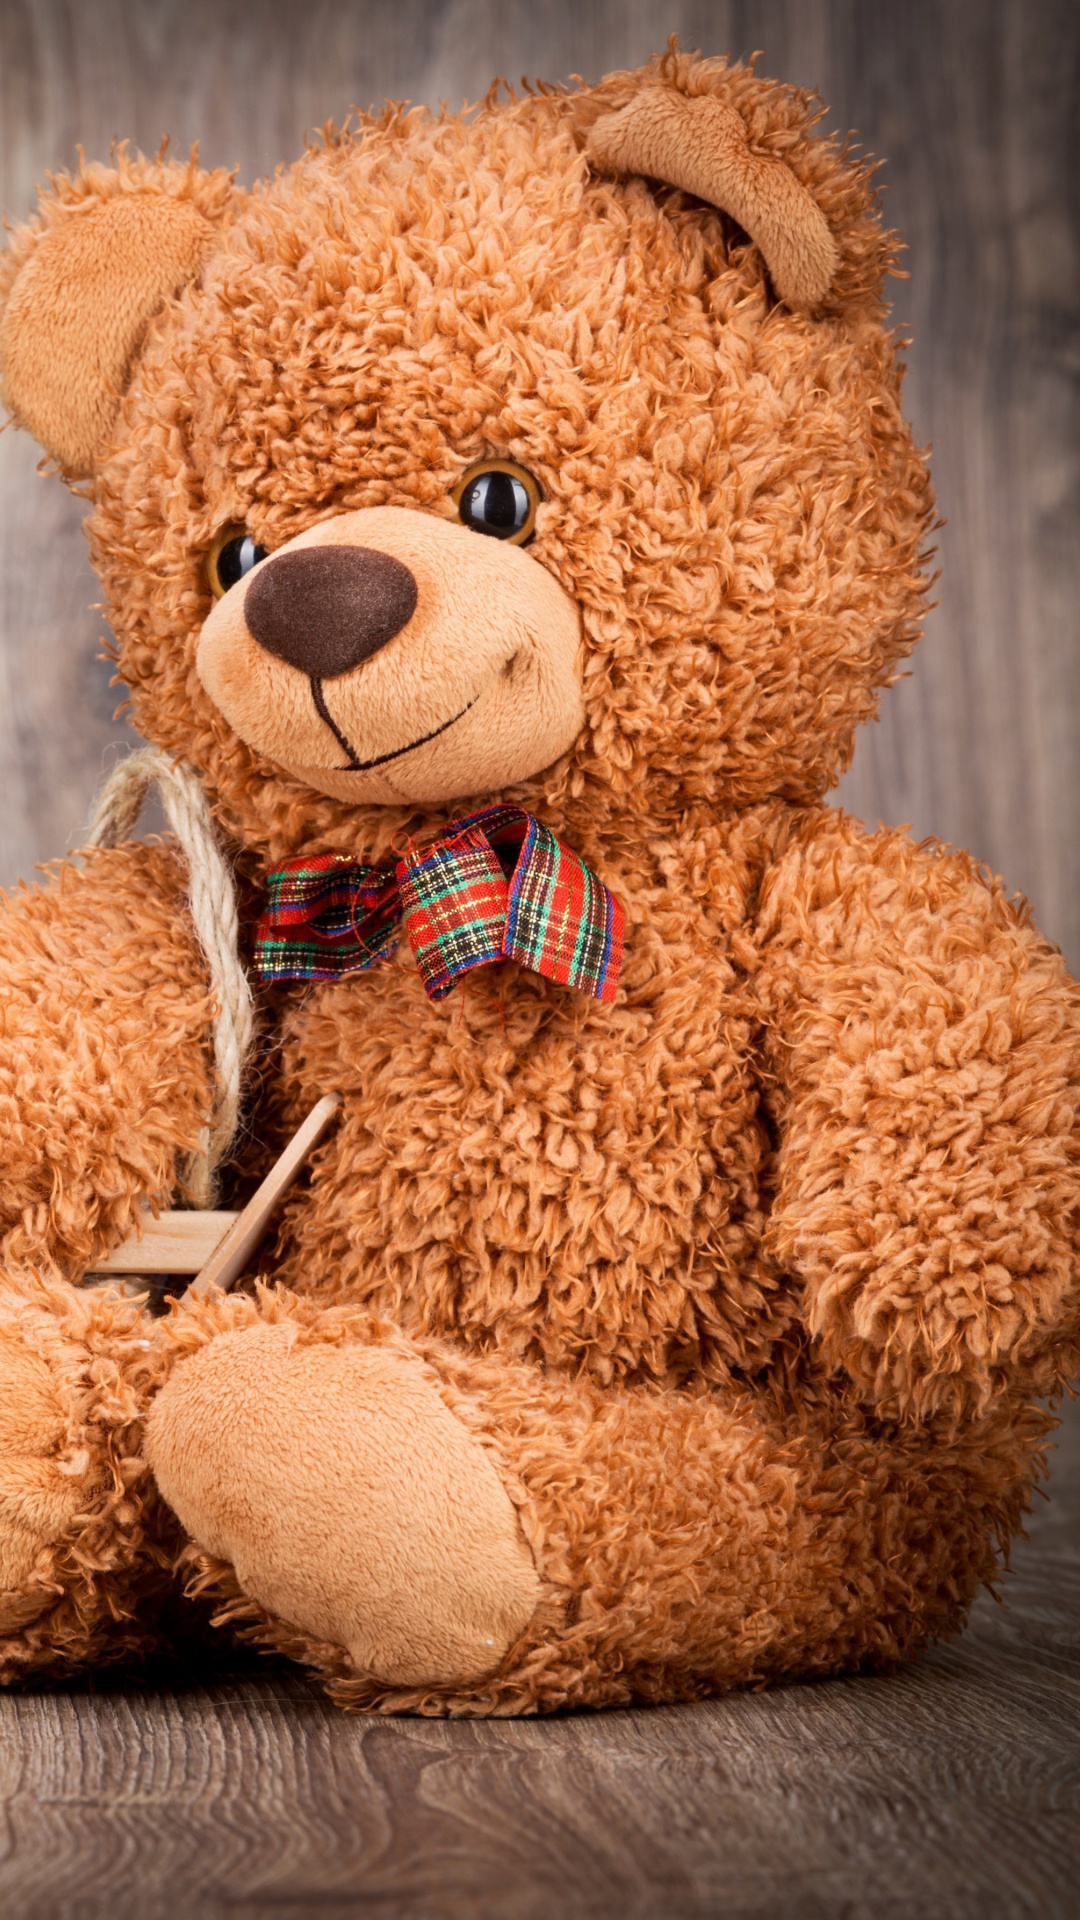 Valentines Day Teddy Bear with Gift screenshot #1 1080x1920